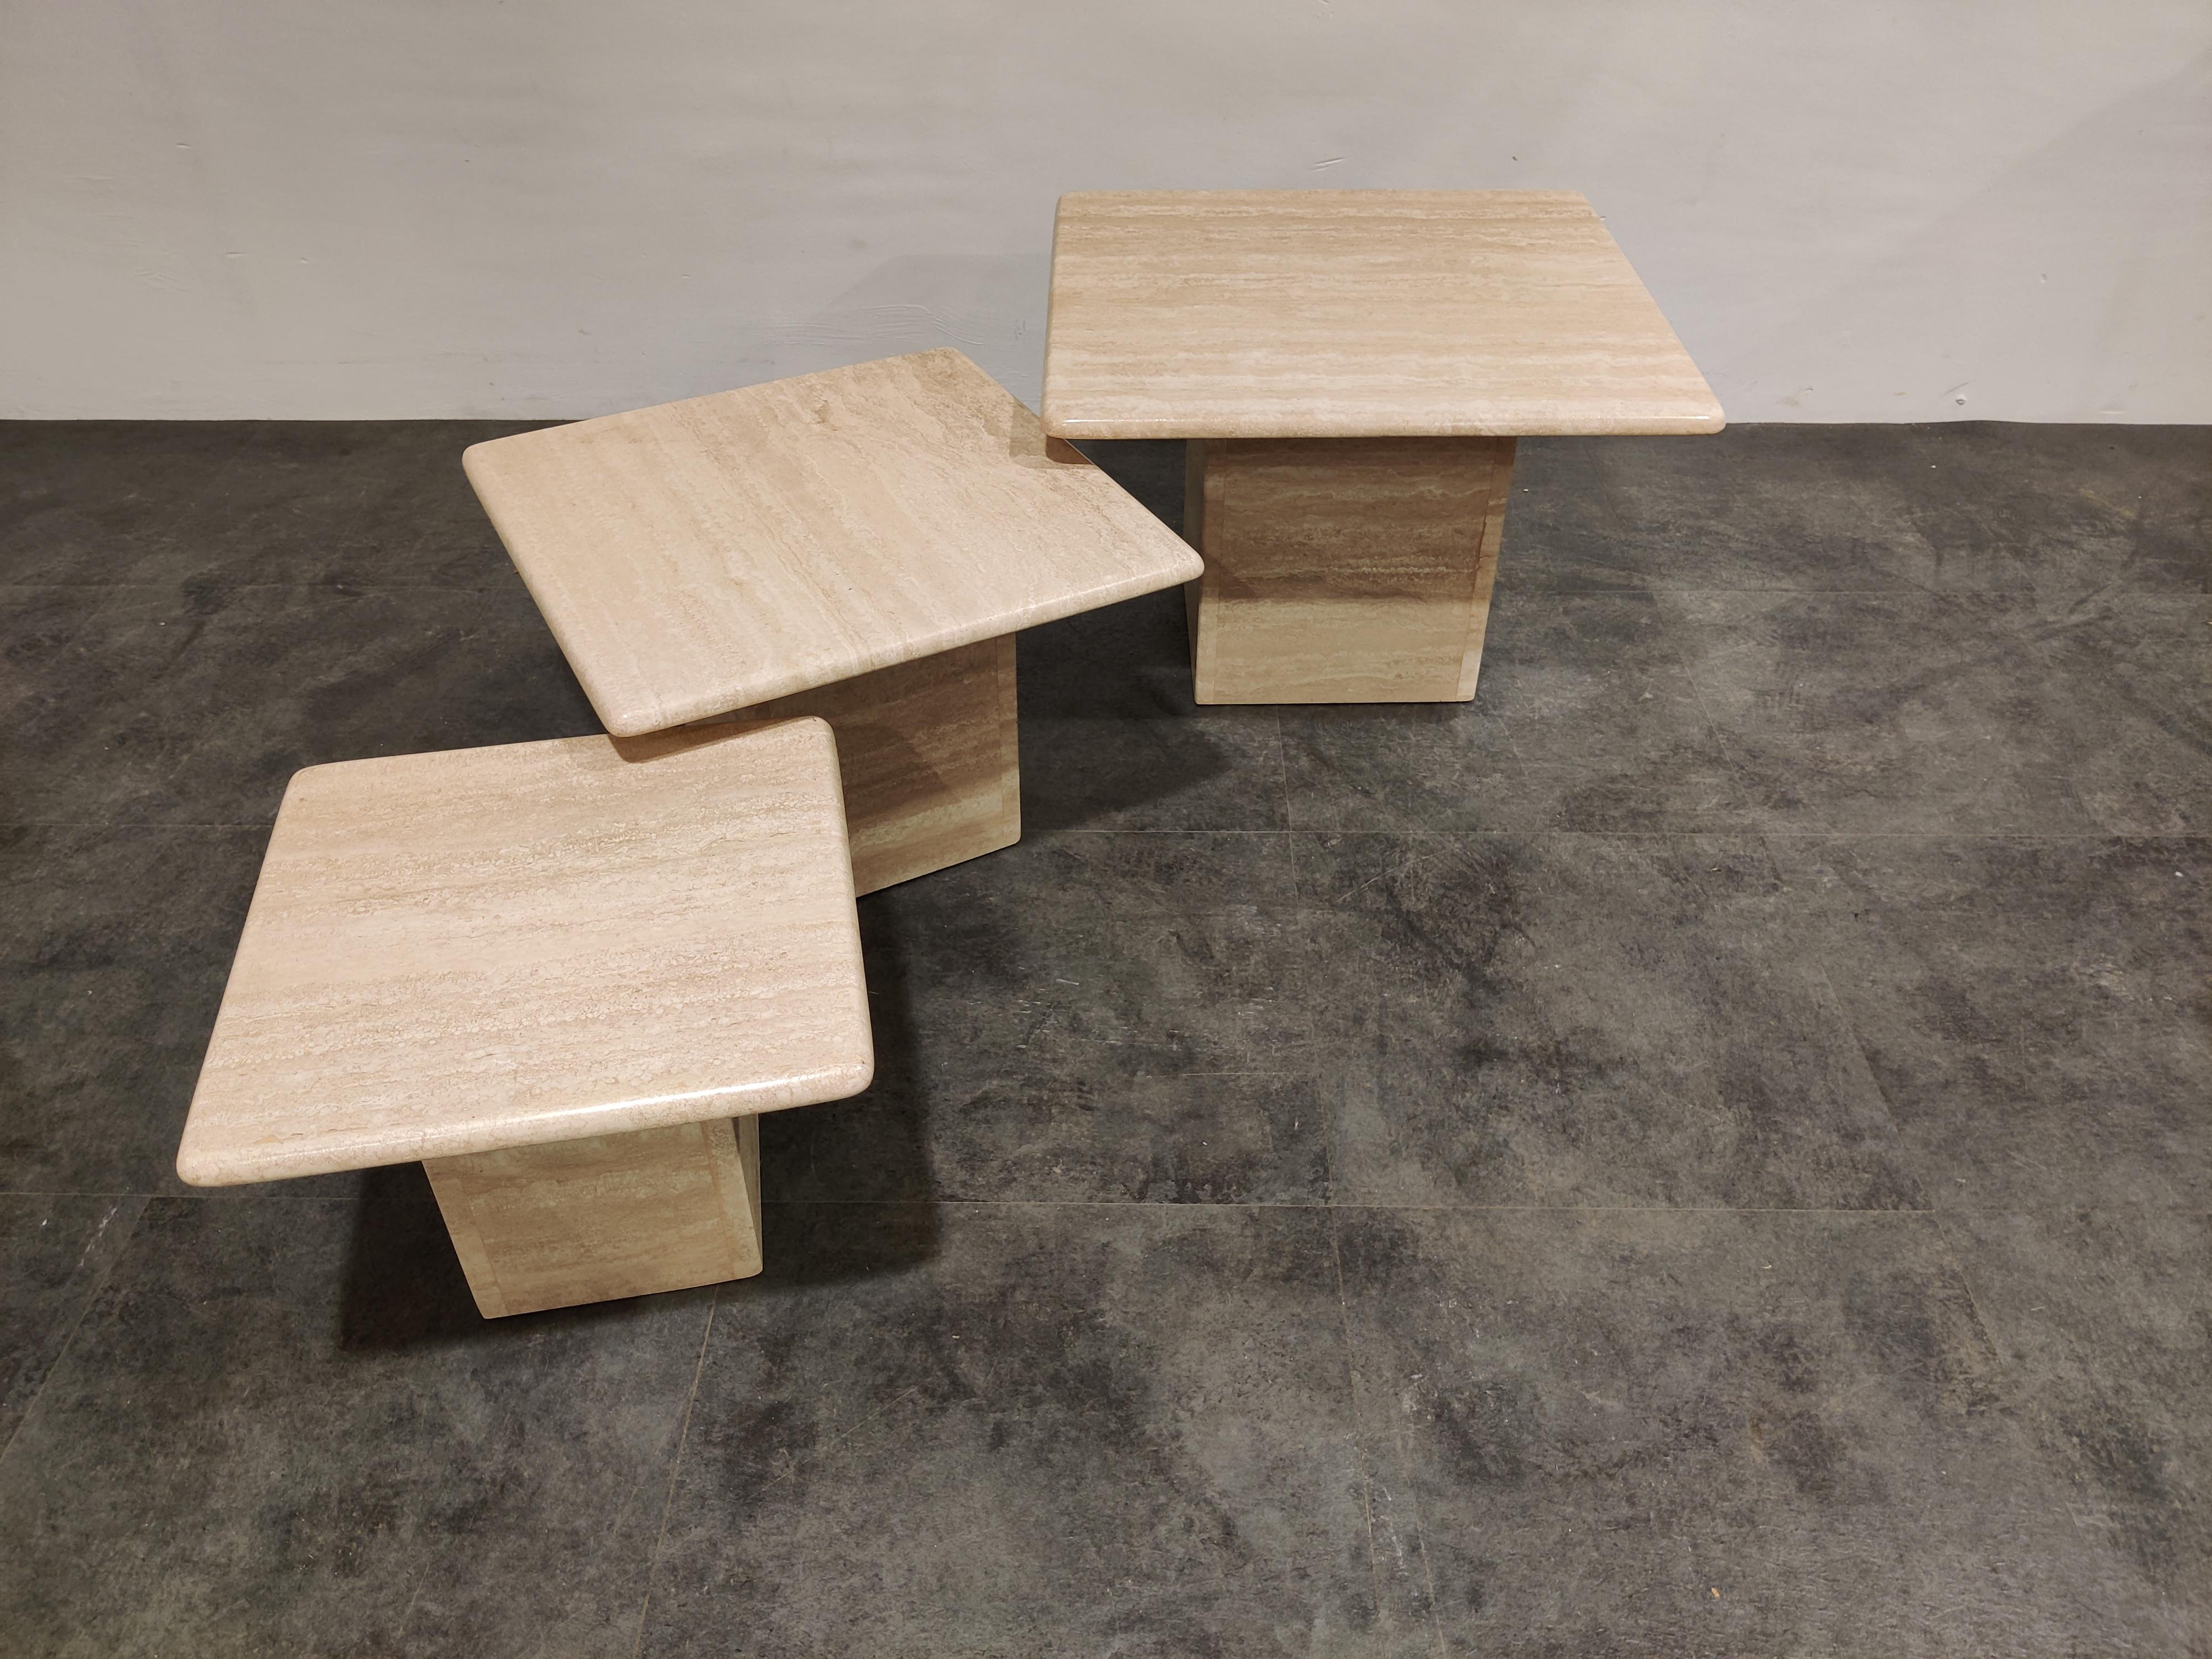 Set of 1970s Italian travertine stone nesting tables or side tables.

The tables can be set up in different compositions. Timeless items.

Beautiful color.

Very good condition

1970s, Italy

Dimensions:
Large table: 60 x 60 x 40 cm